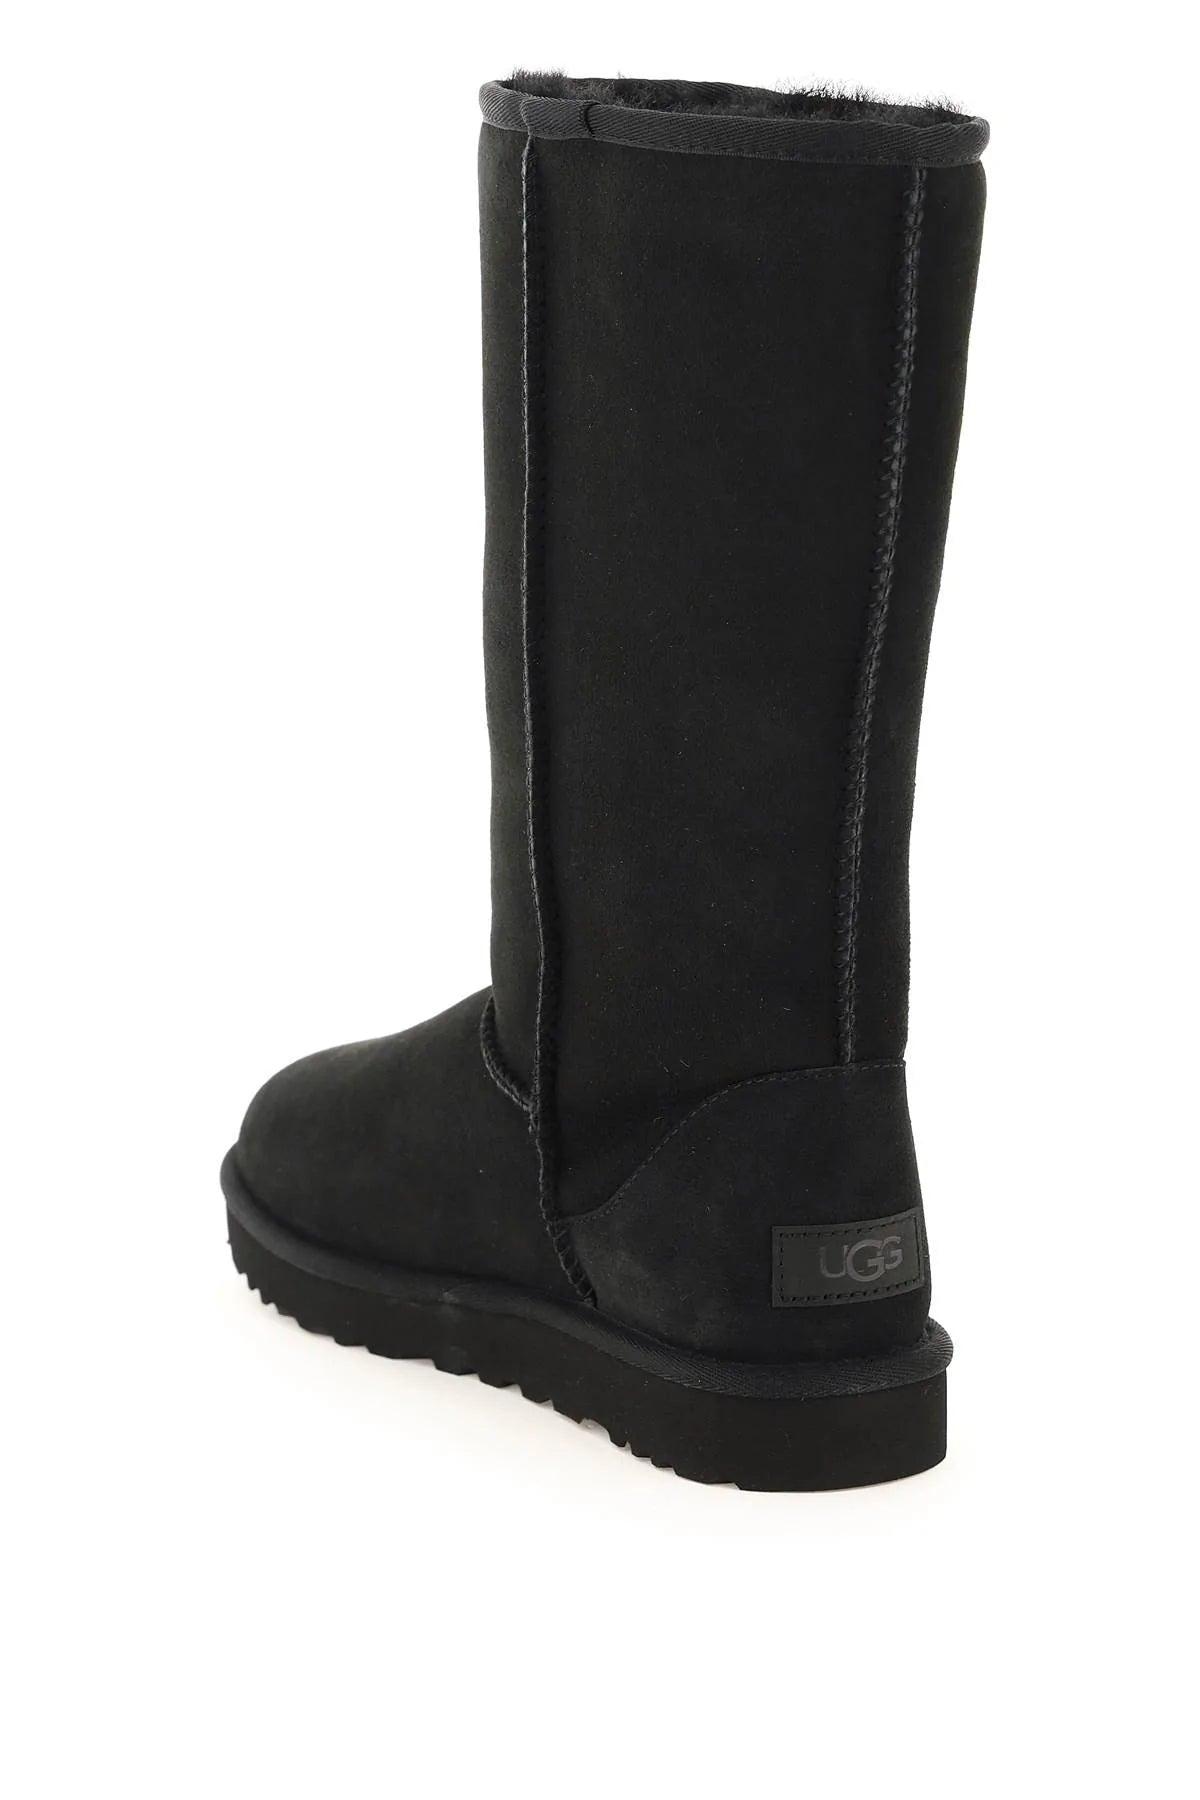 UGG Classic Tall Ii Boots in Black | Lyst